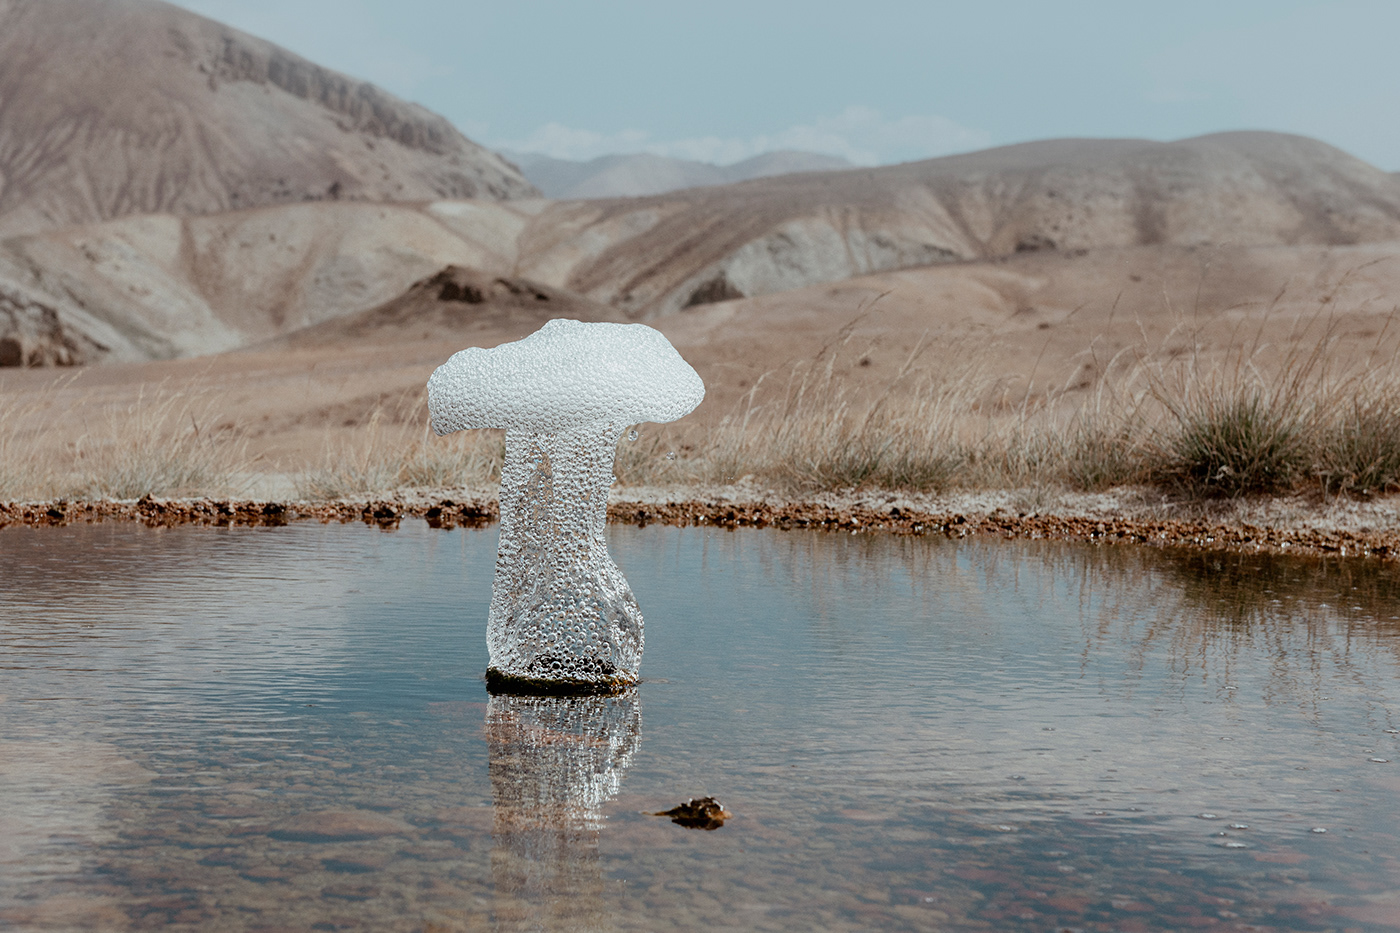 water Nature Photography  geyser sculpture abstract shapes Travel outdoors shutterspeed